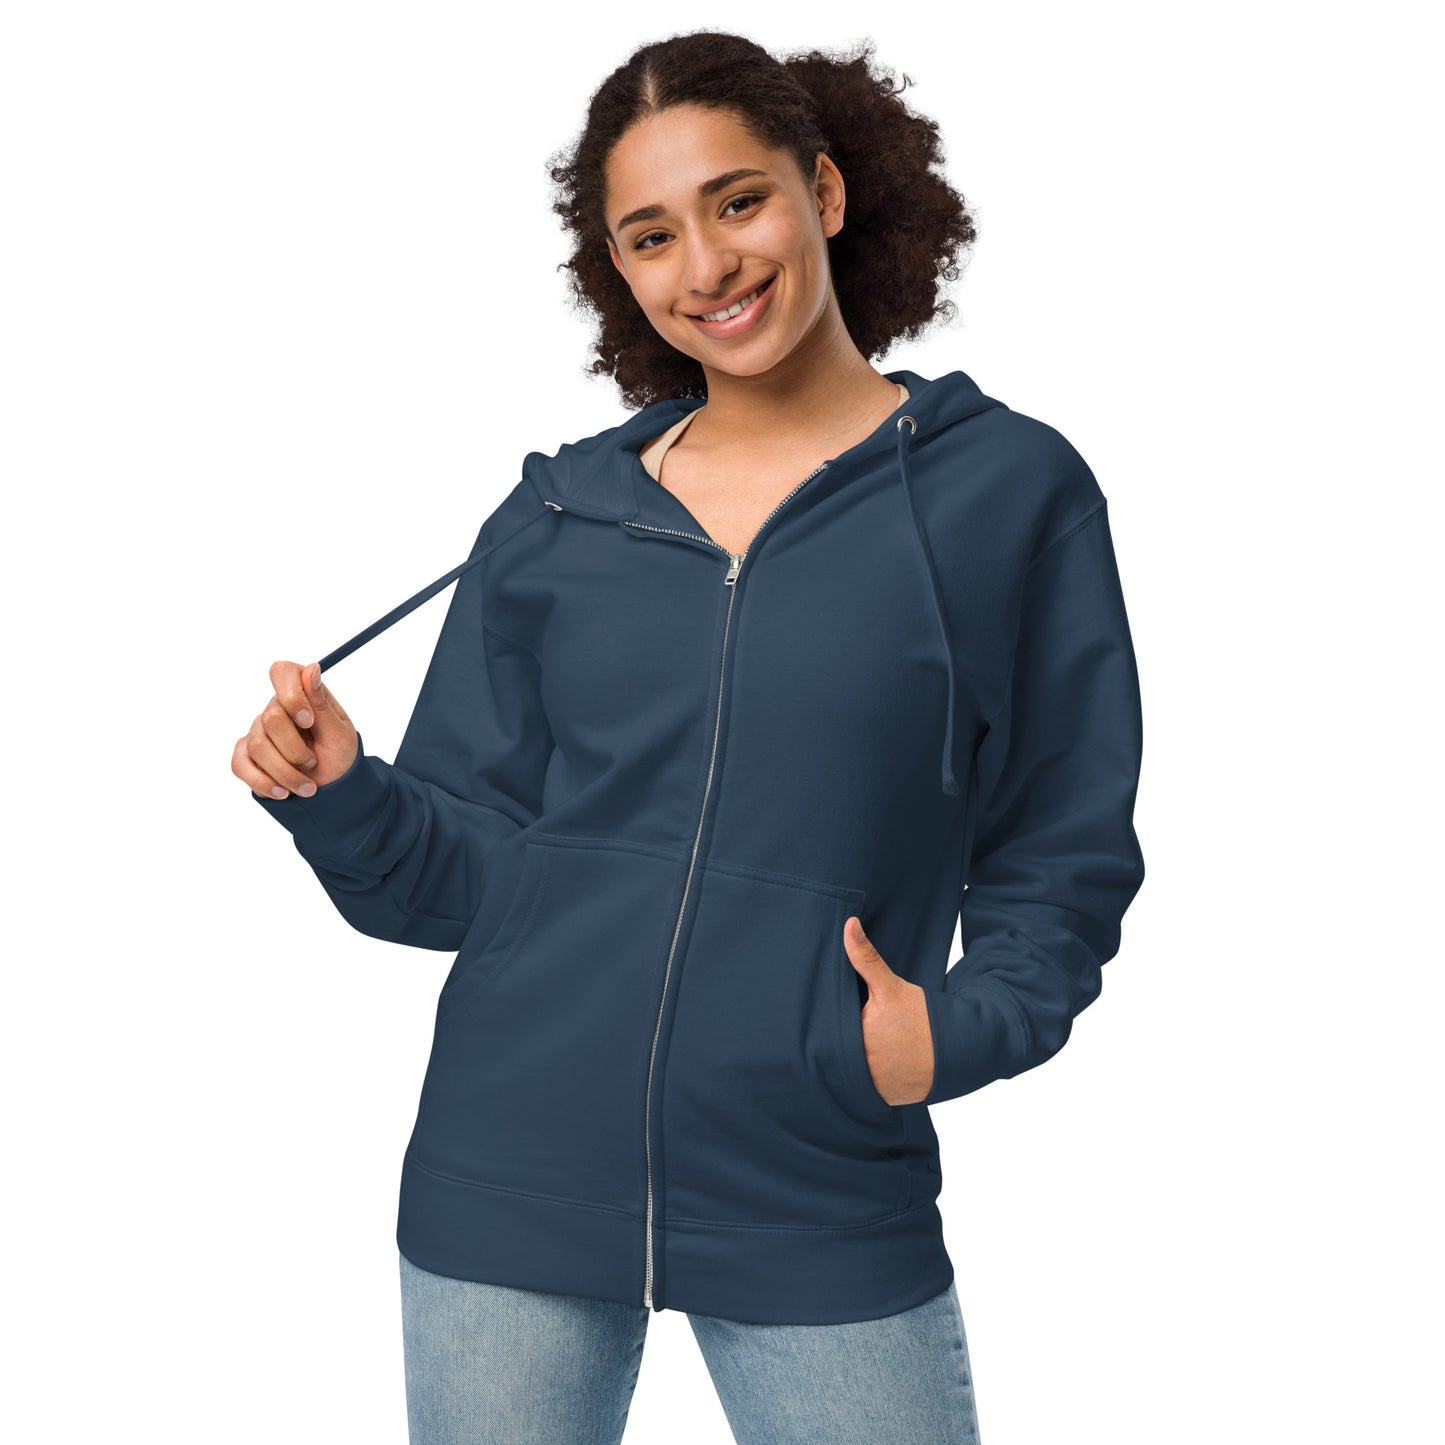 Navy blue colored unisex fleece zip-up hoodie. Features a back design of Nikolai the root beer float fuzzy noodle dragon. Front view on female model.